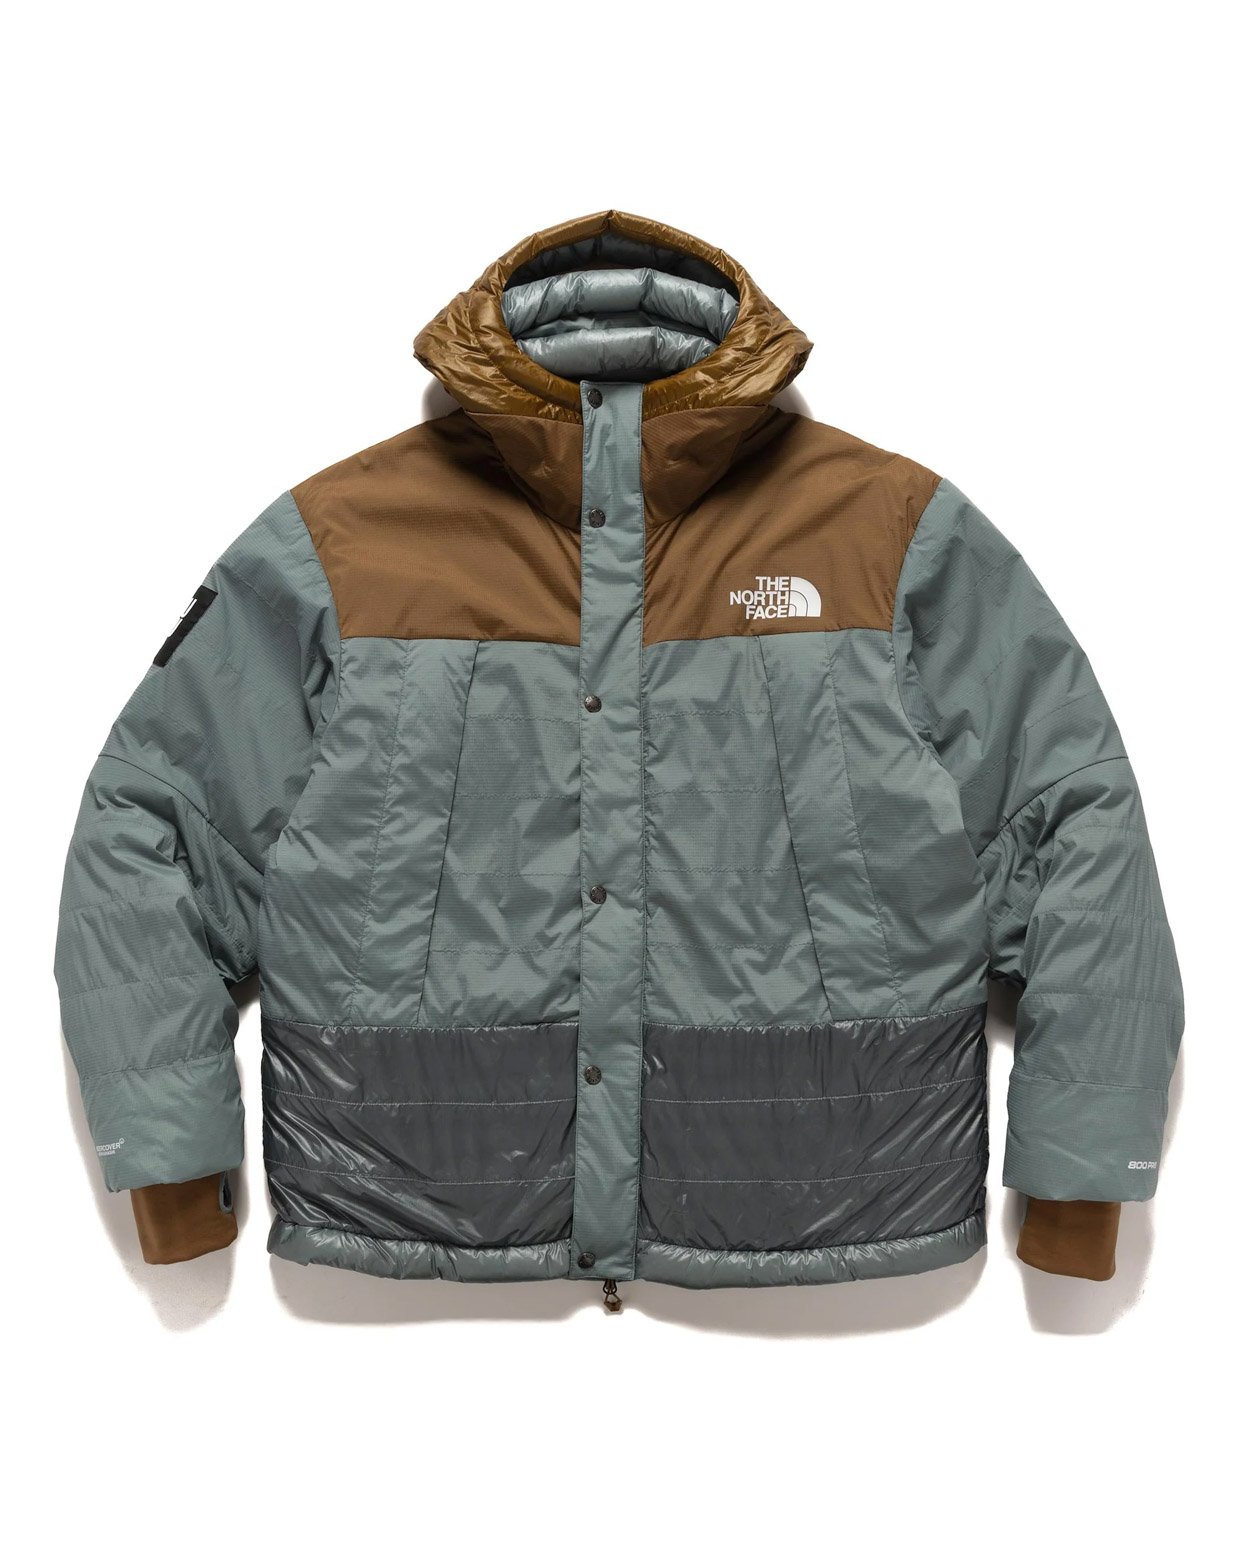 The North Face x Undercover Soukuu Mountain Jacket